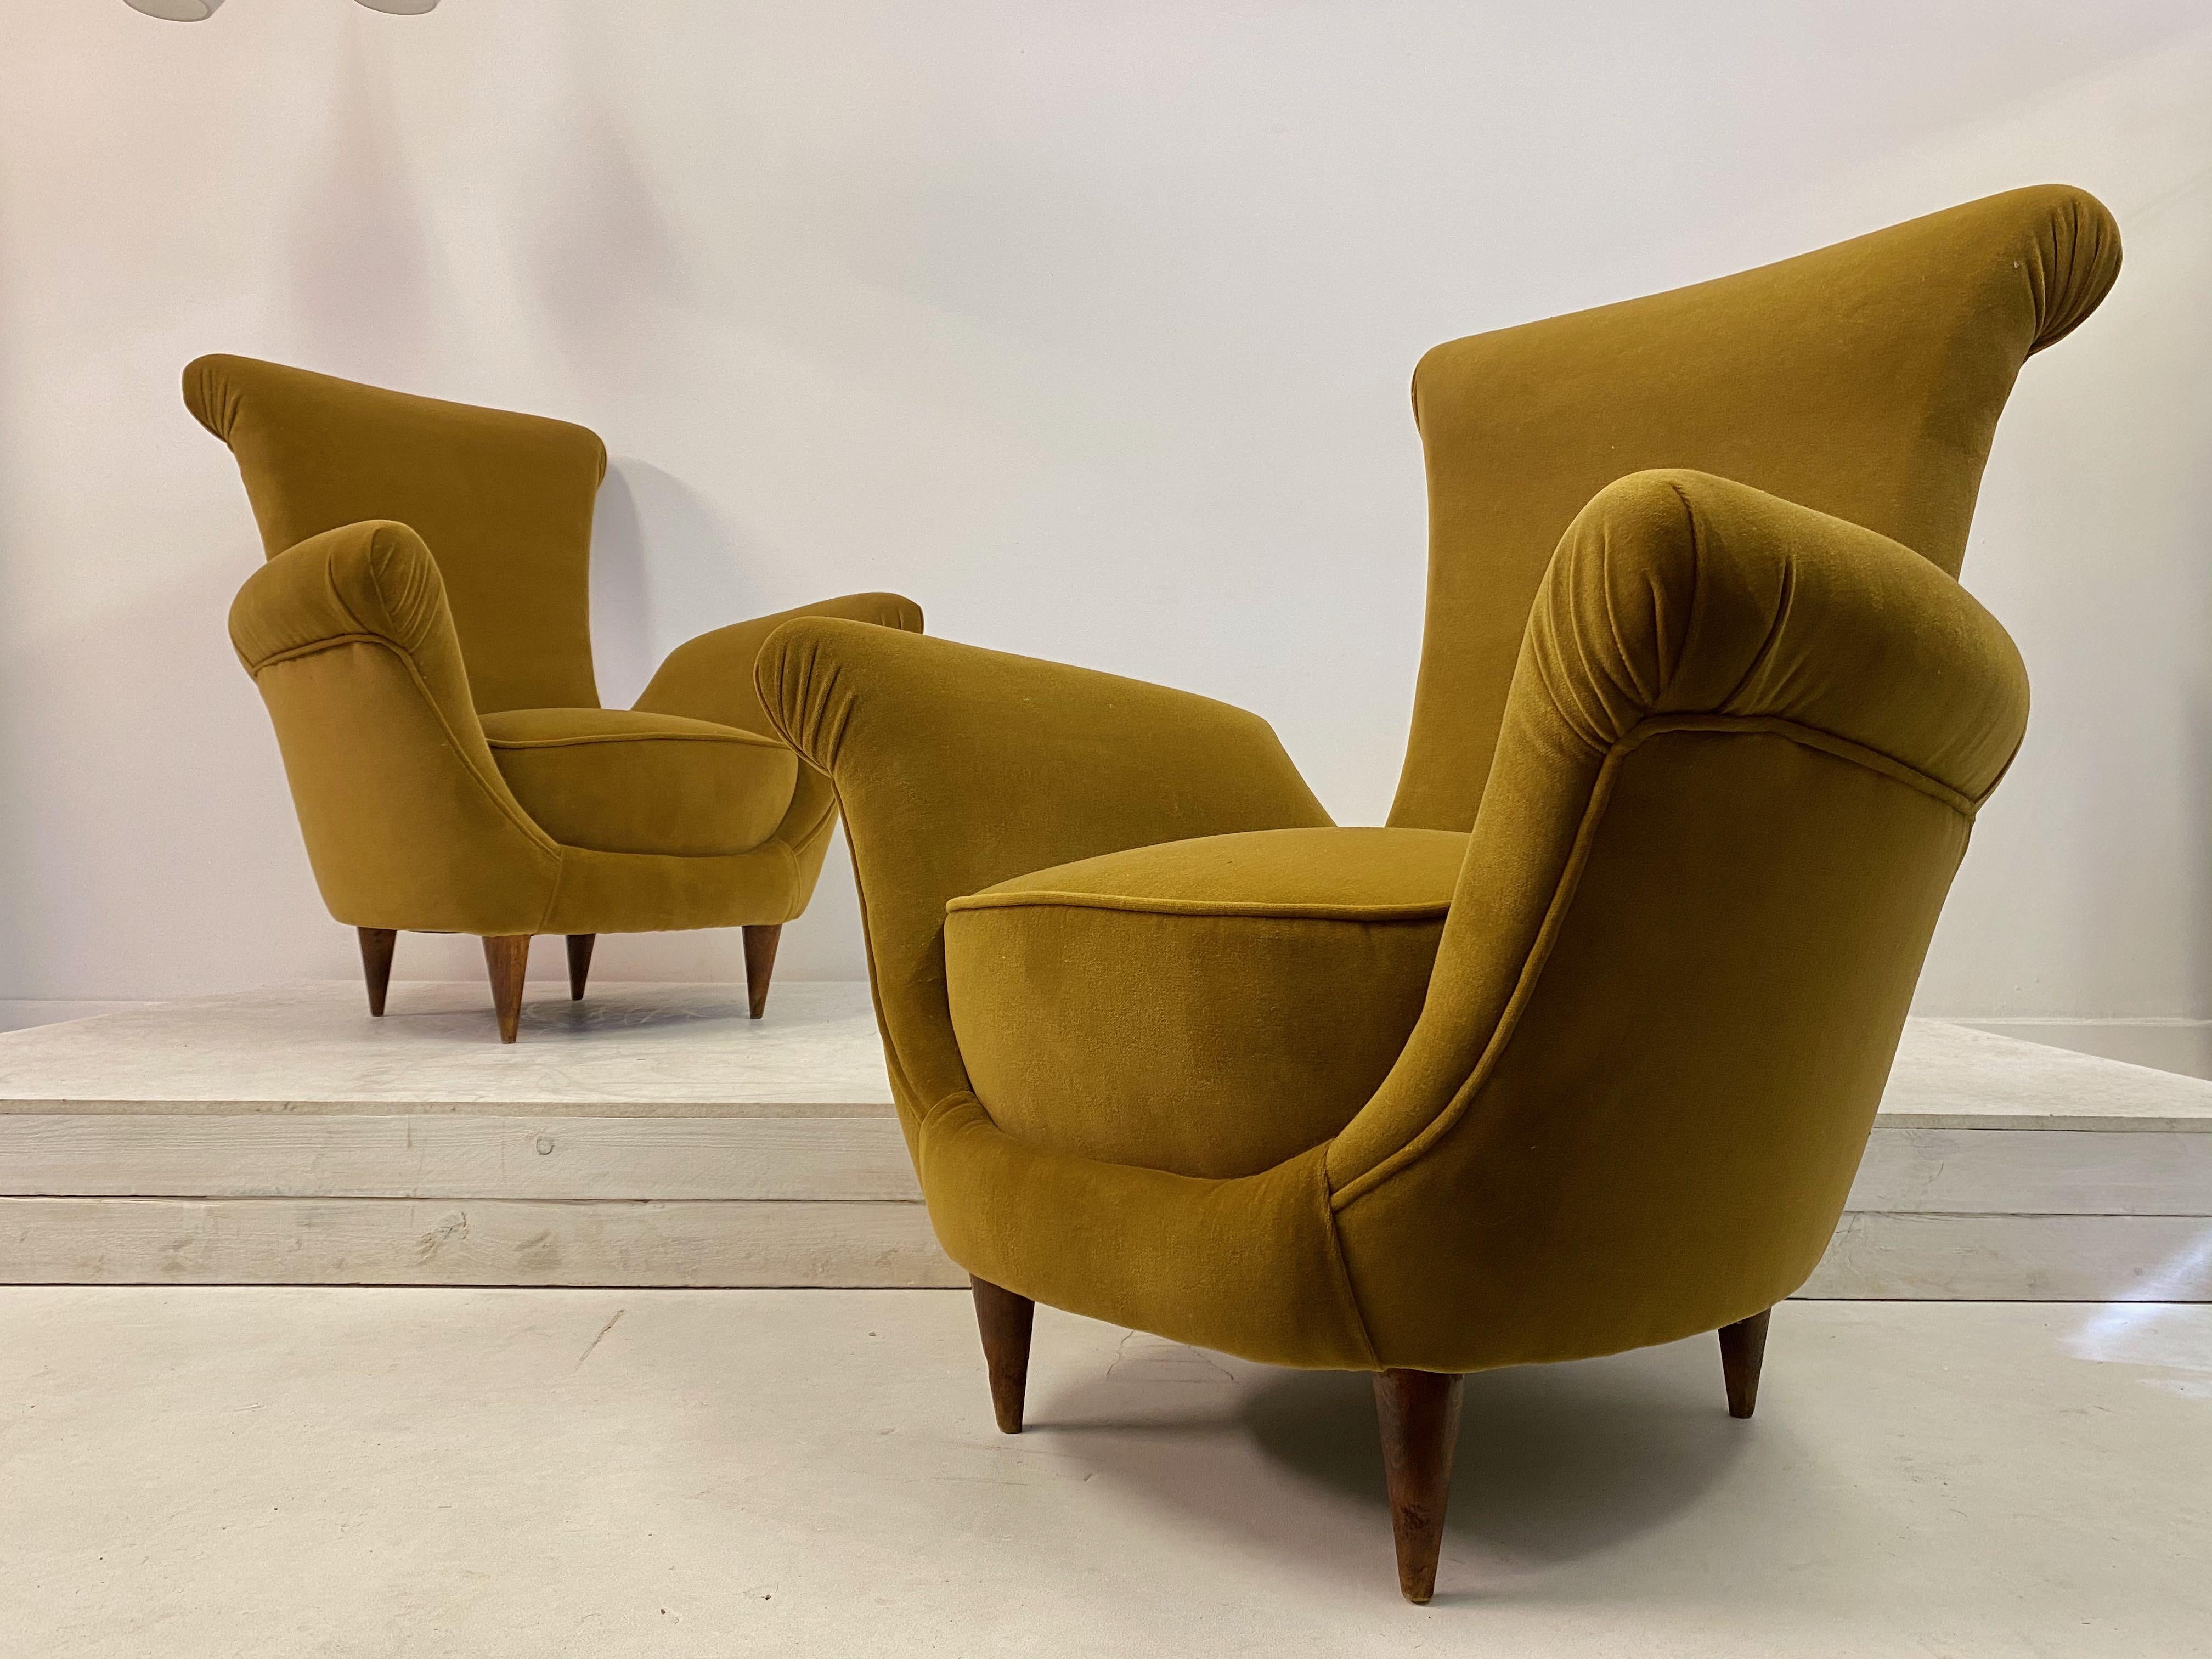 Unusual shaped armchairs

Reupholstered in mustard velvet

Turned conical legs

1950s Italian.